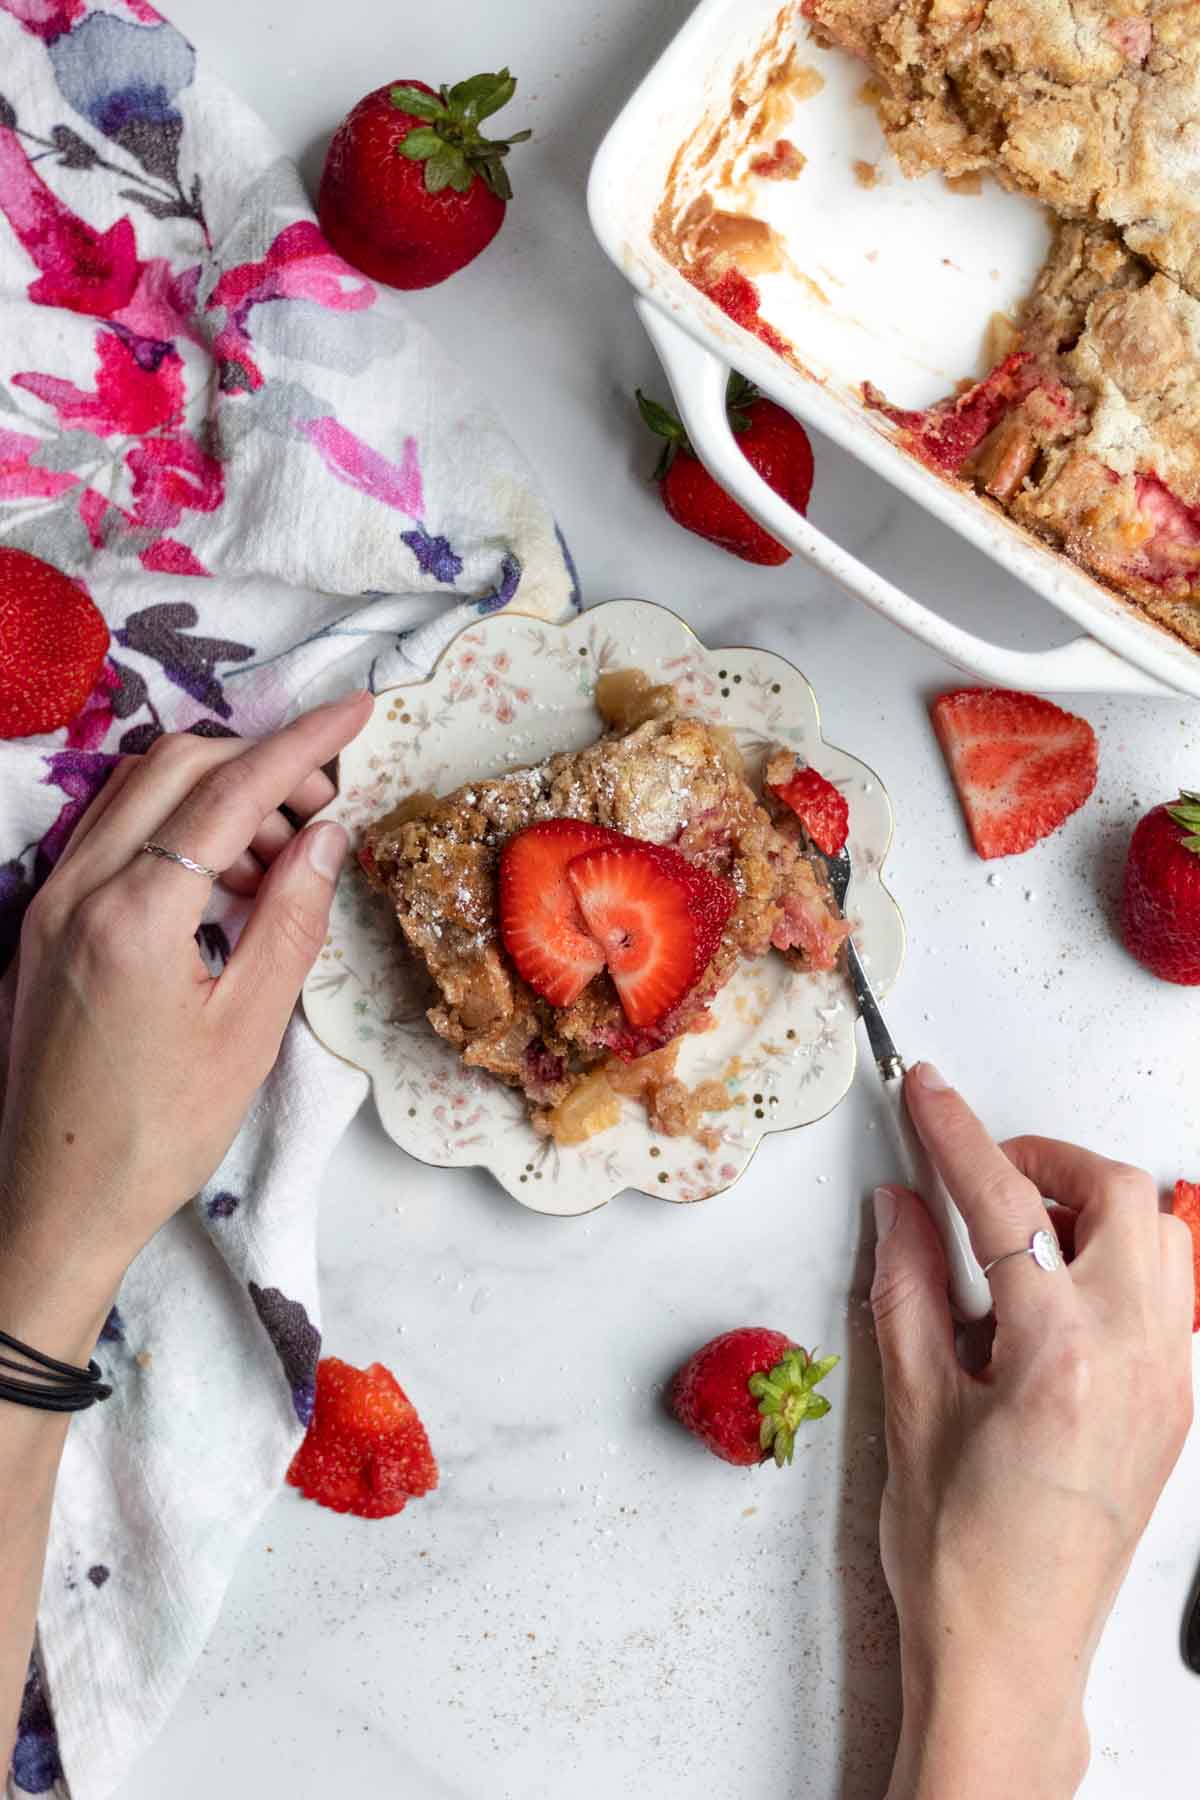 Hands using a fork on gluten free and nut free Strawberry Apple Dump Cake.